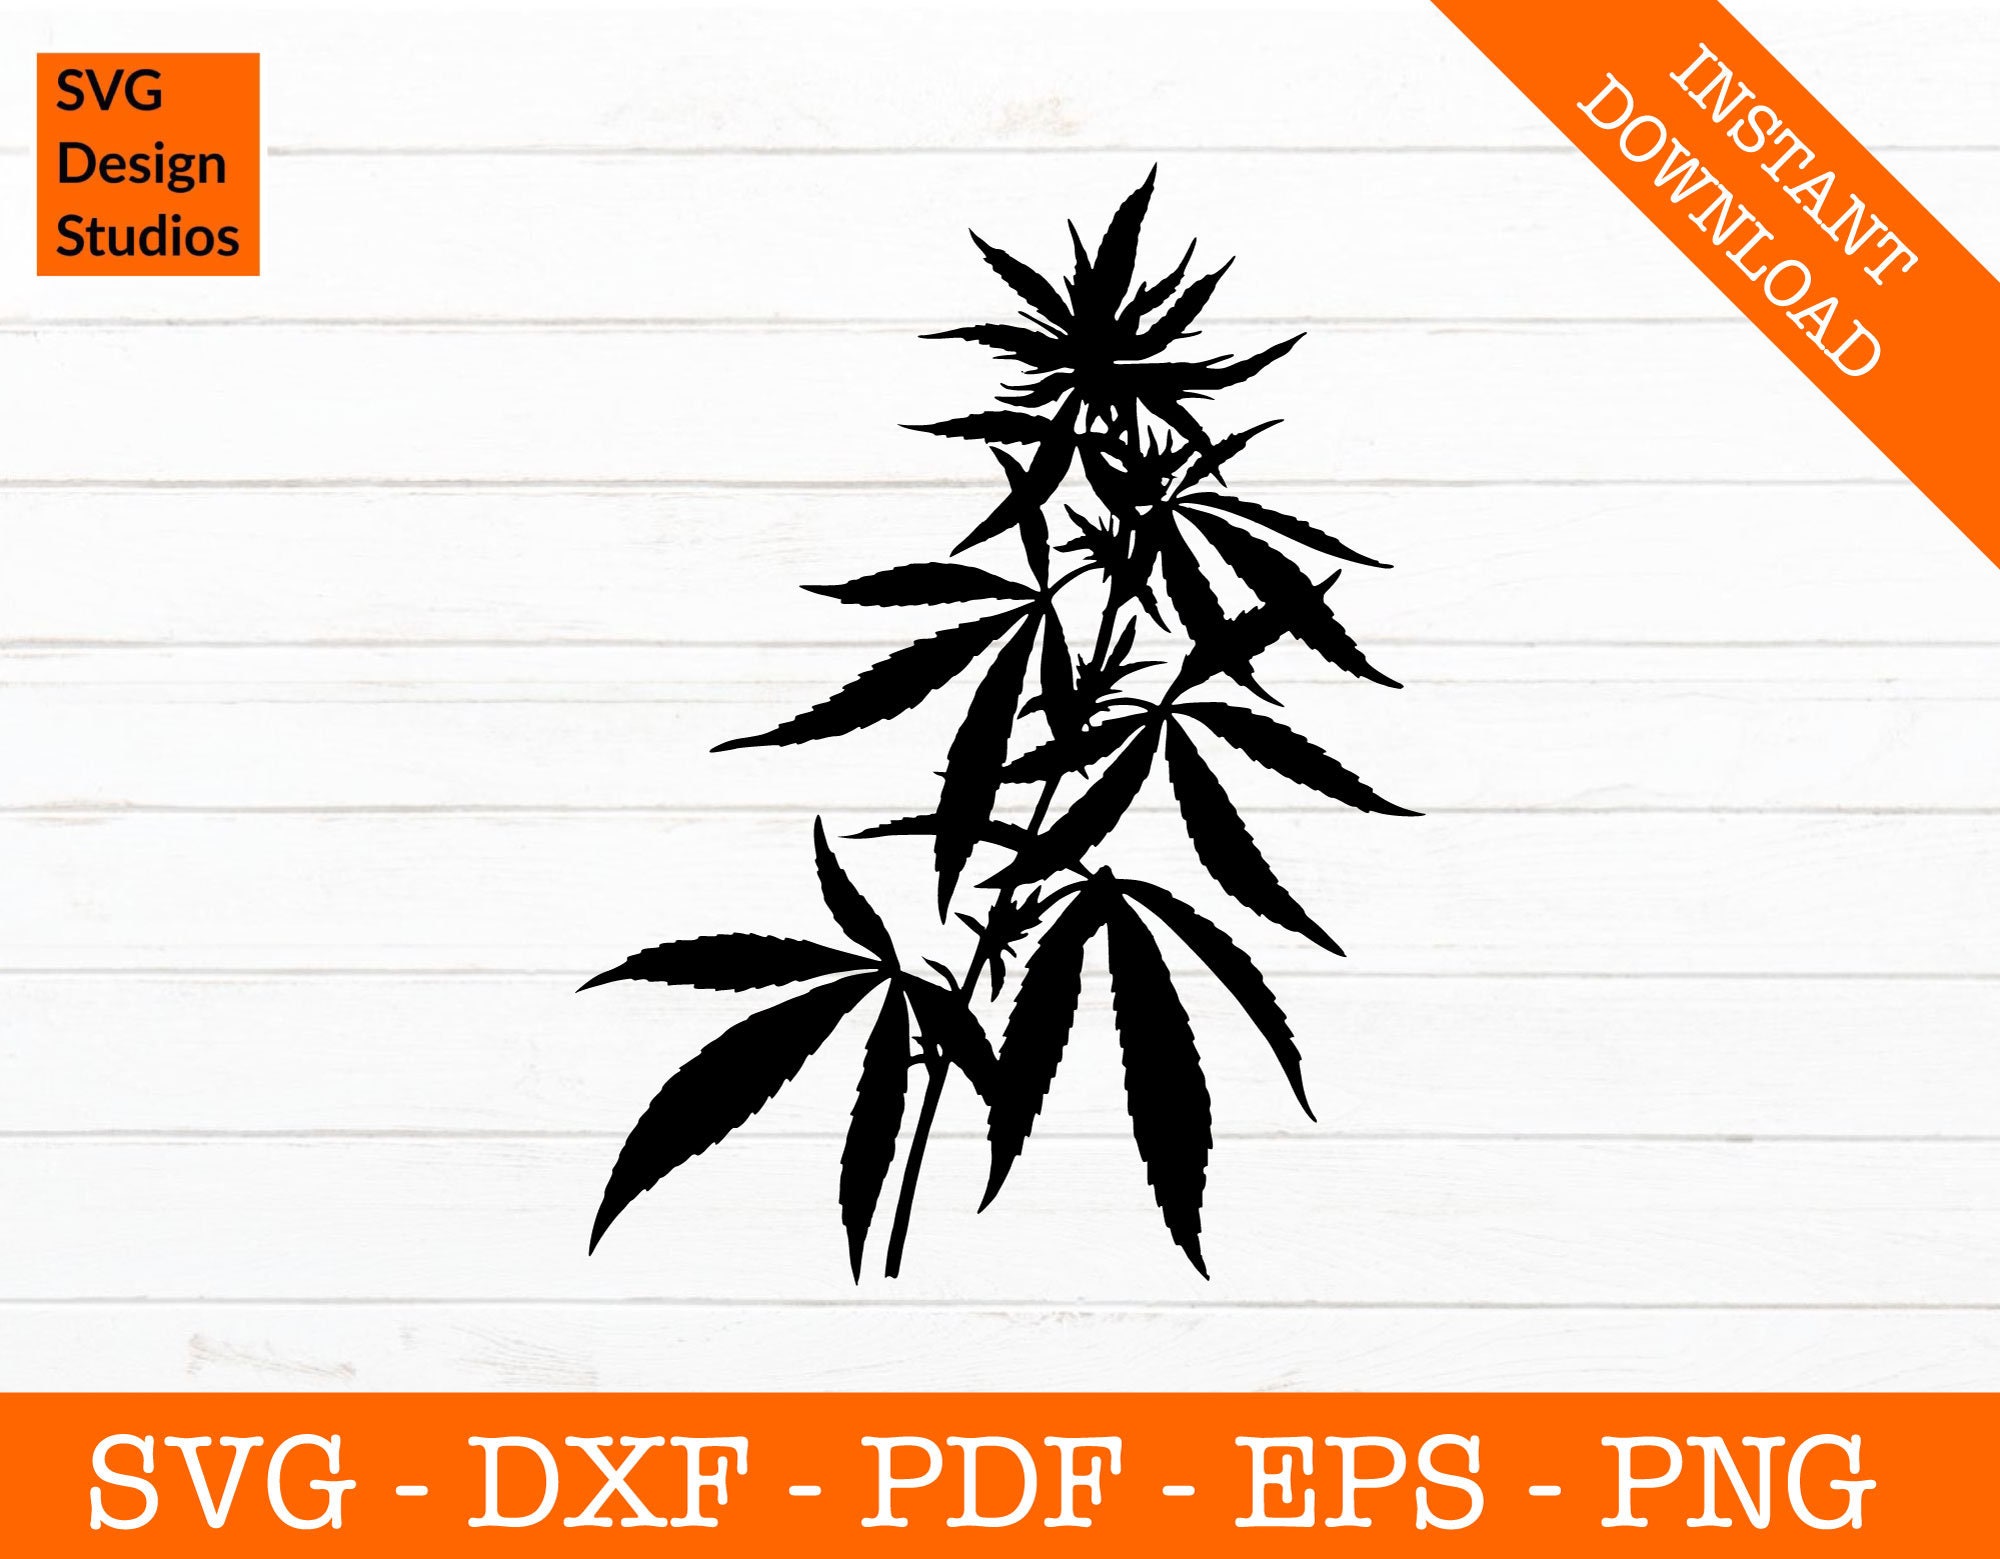 this is the weed leaf stencils set